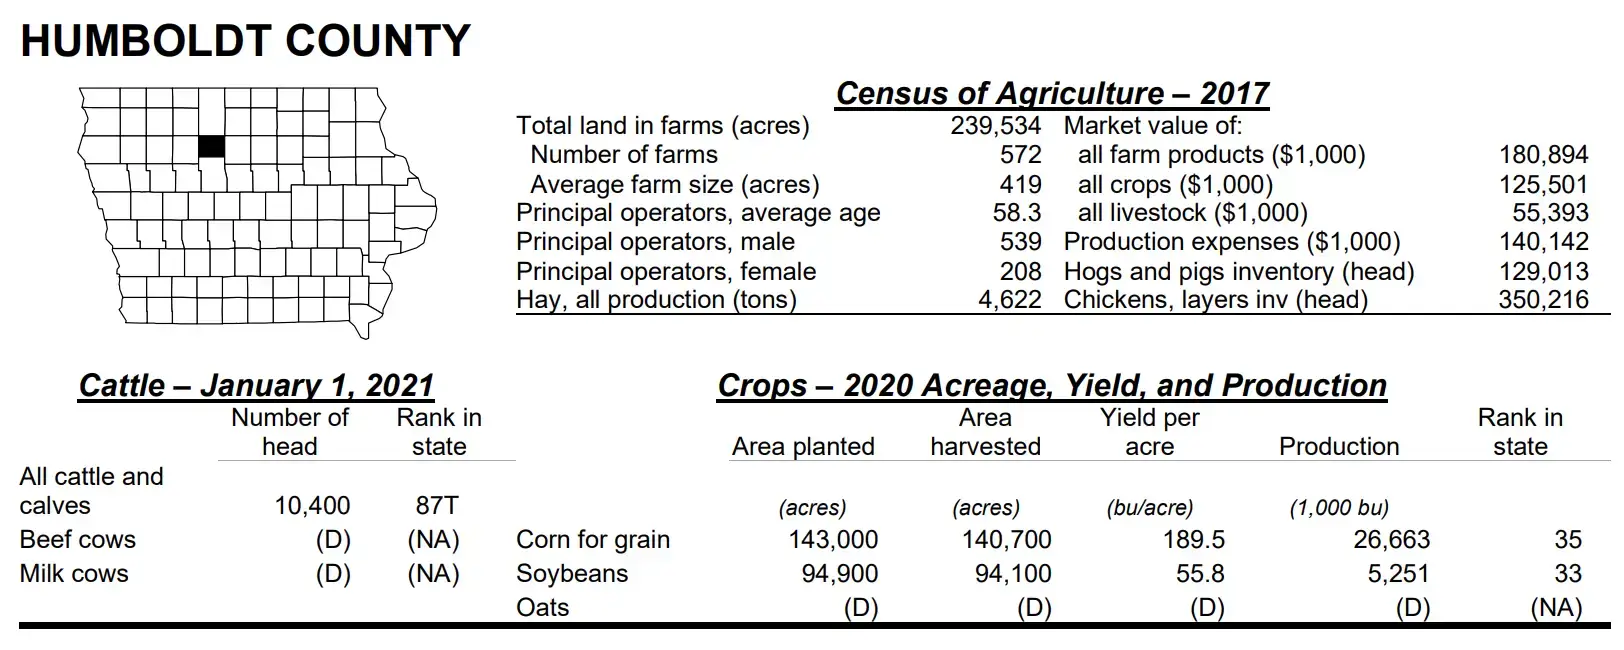 Humboldt County Iowa Agriculture profile